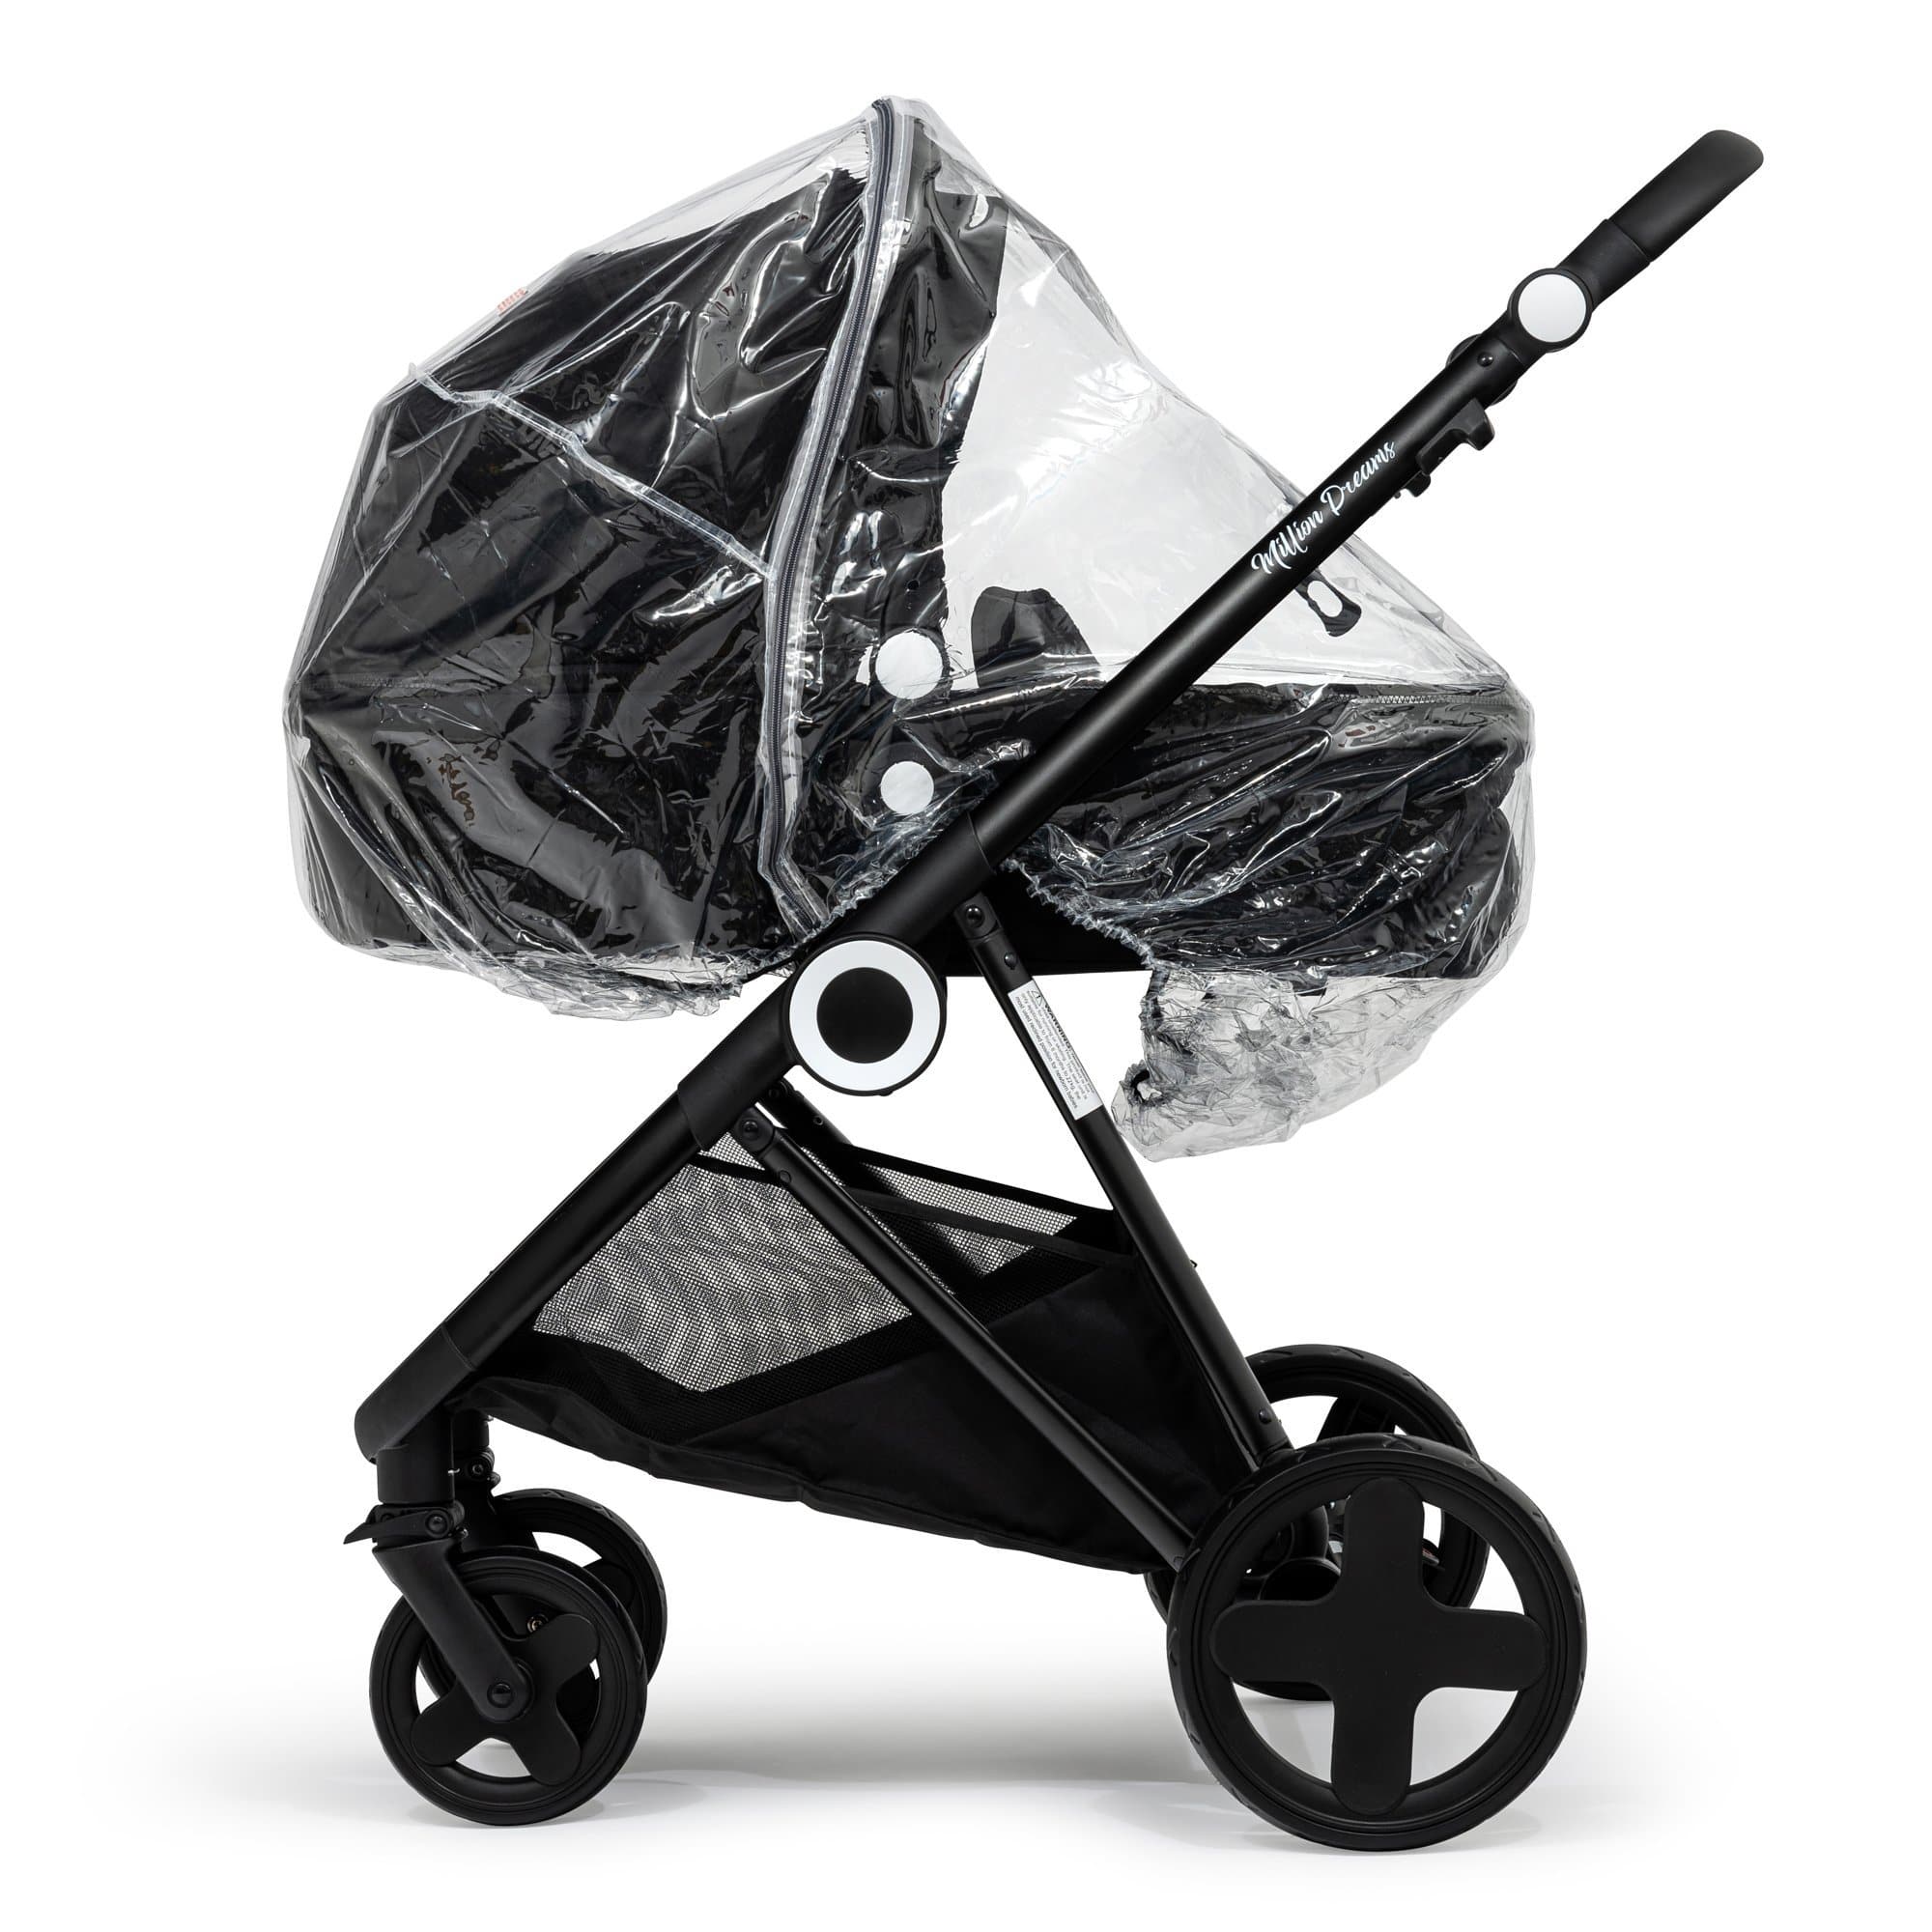 2 in 1 Rain Cover Compatible with Joie - Fits All Models - For Your Little One